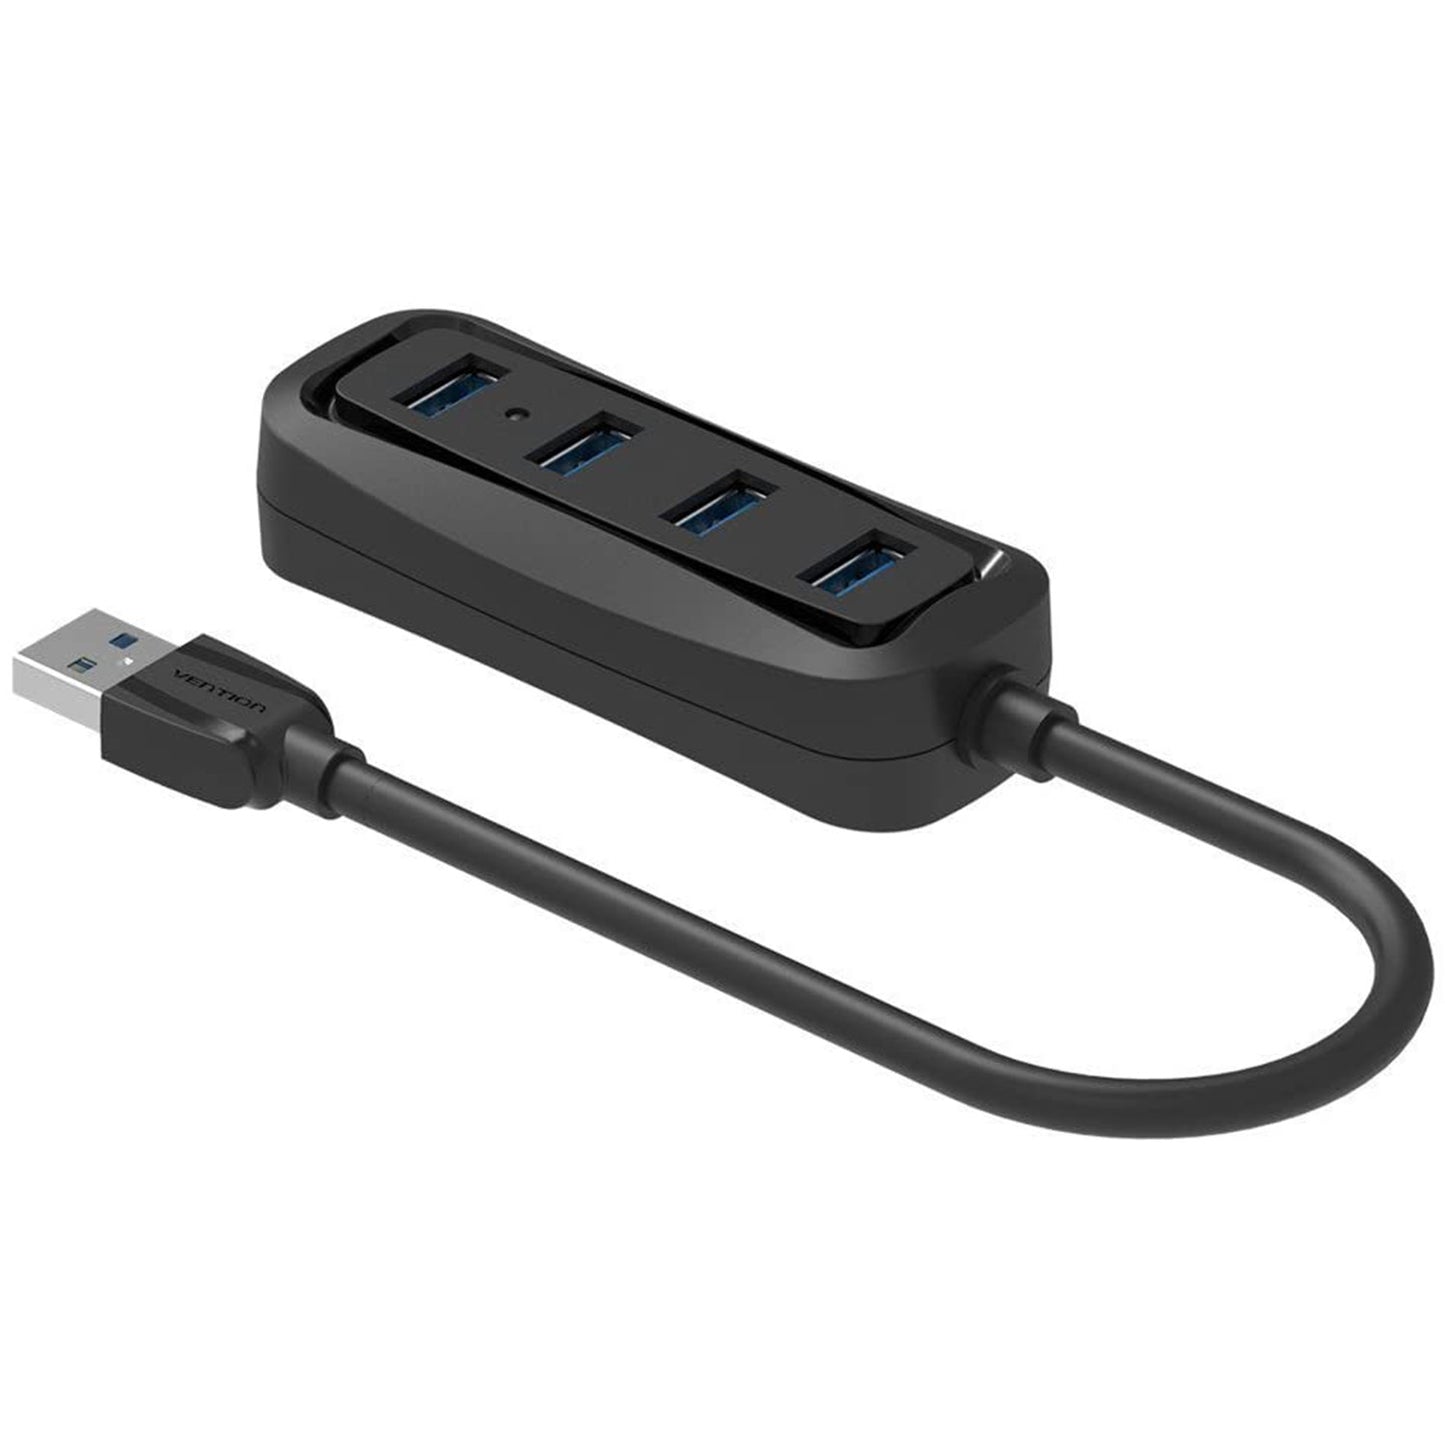 Vention USB 2.0 Hub 4-Ports 480Mbps High-Speed Transfer with LED Indicator Lamp (Different Cable Lengths Available) (VAS-J43)